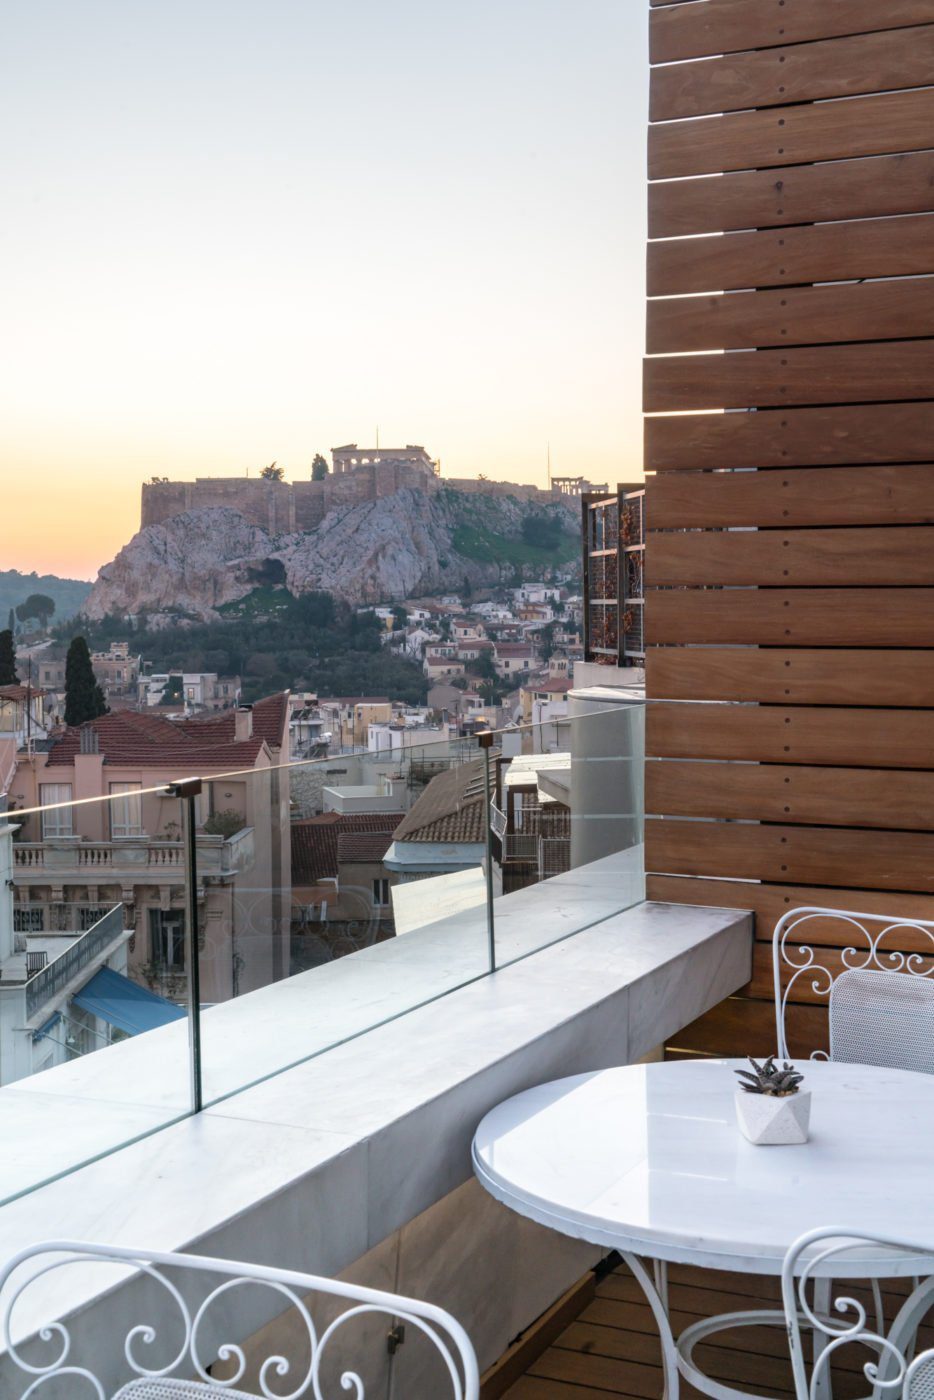 Best viewpoint of the Acropolis from the rooftop terrace at New Hotel Athens